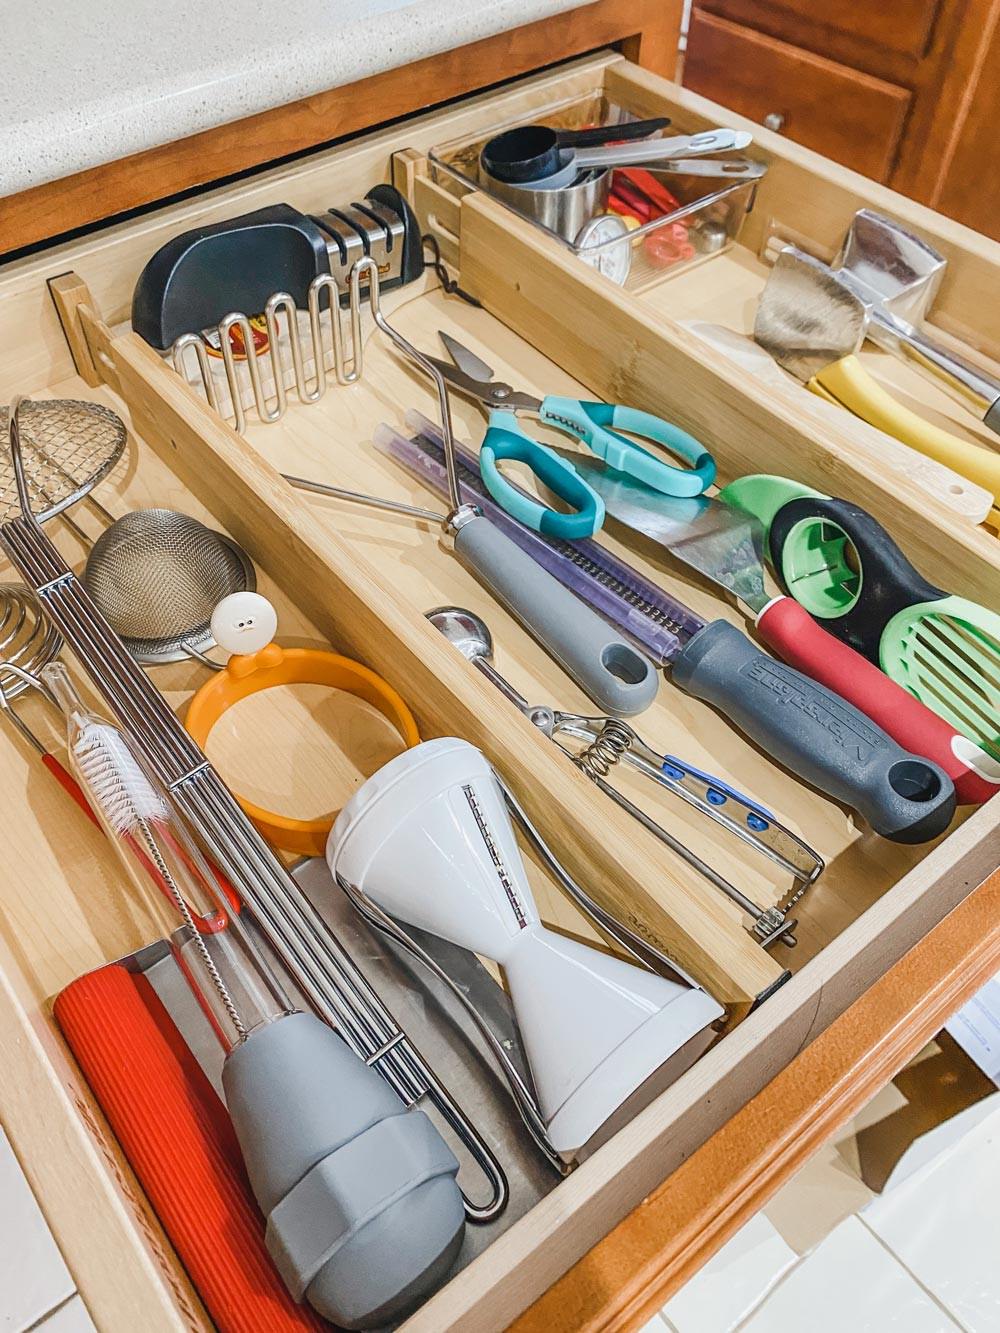 Utensil Drawer After A 